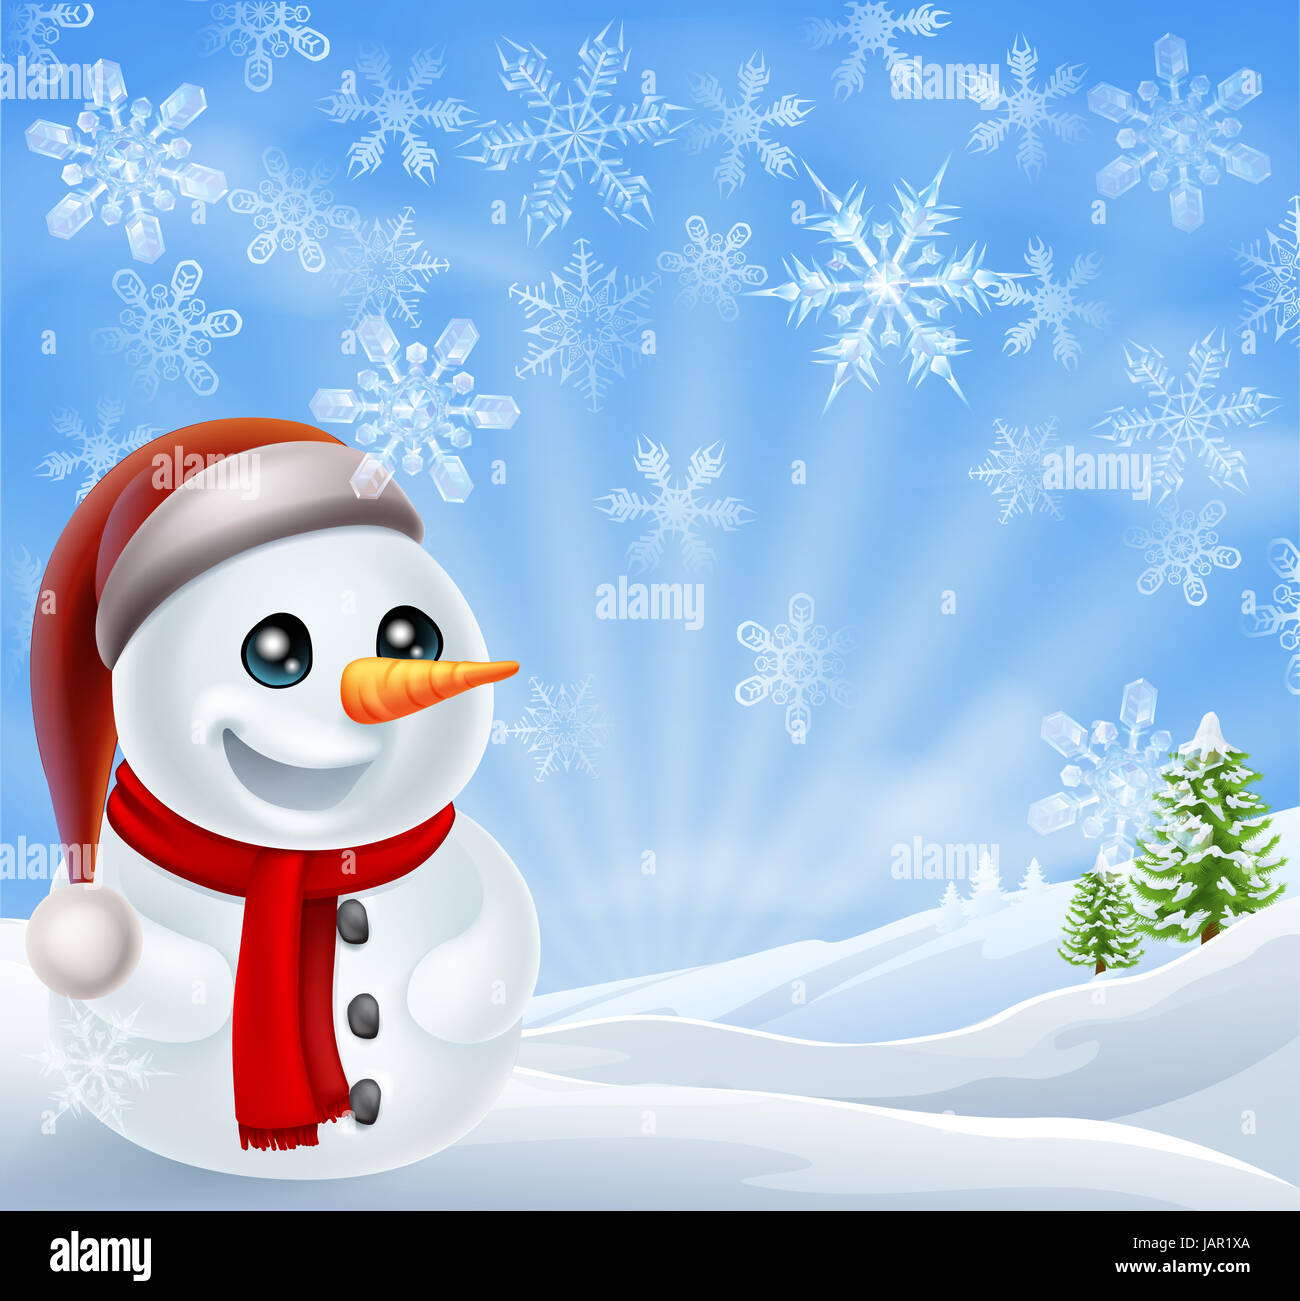 A Cartoon Snowman Standing In A Snow Covered Christmas Landscape Stock Photo Alamy